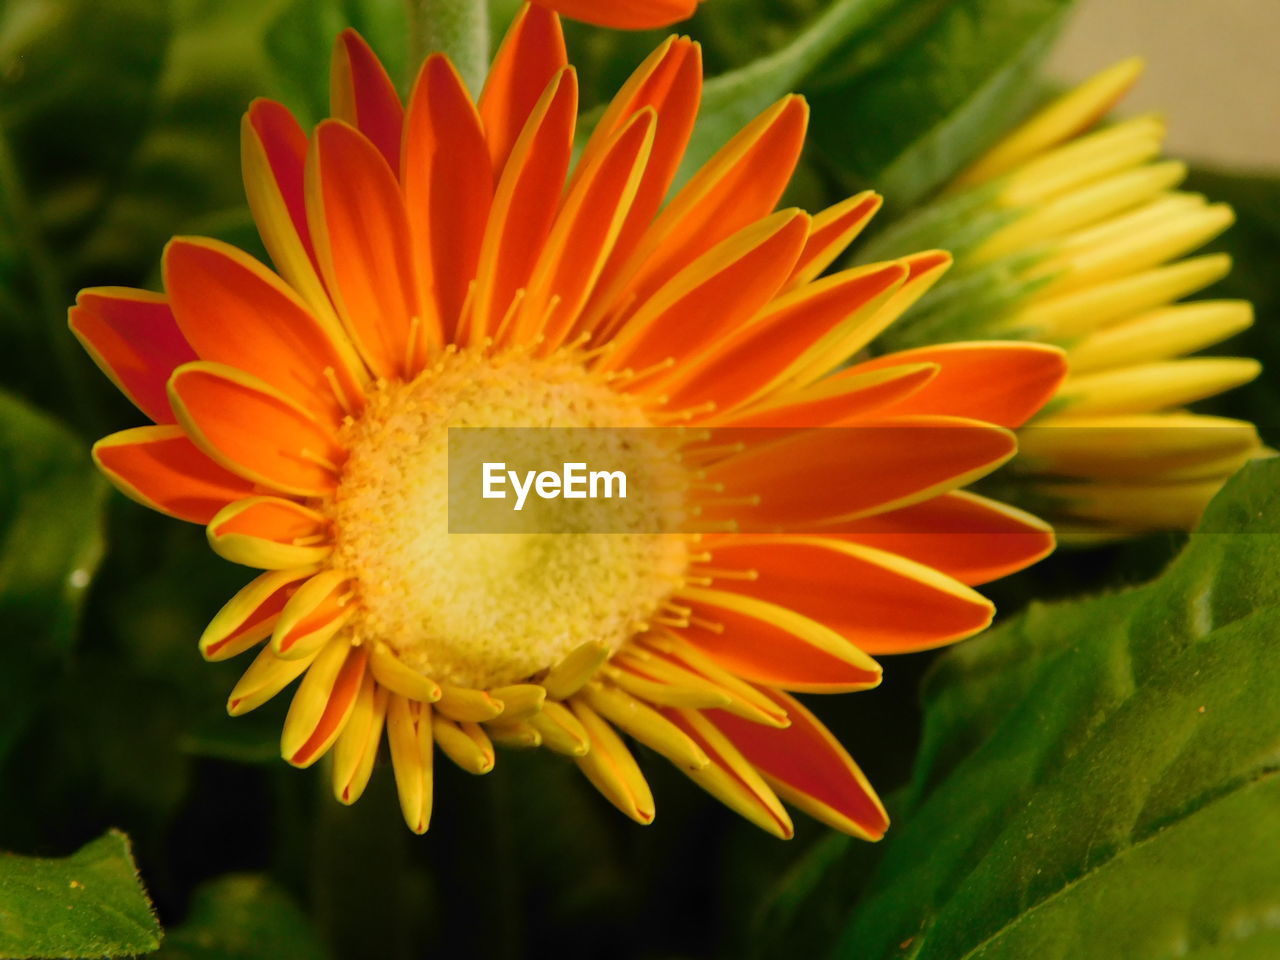 CLOSE-UP OF ORANGE FLOWER AGAINST YELLOW AND LEAF